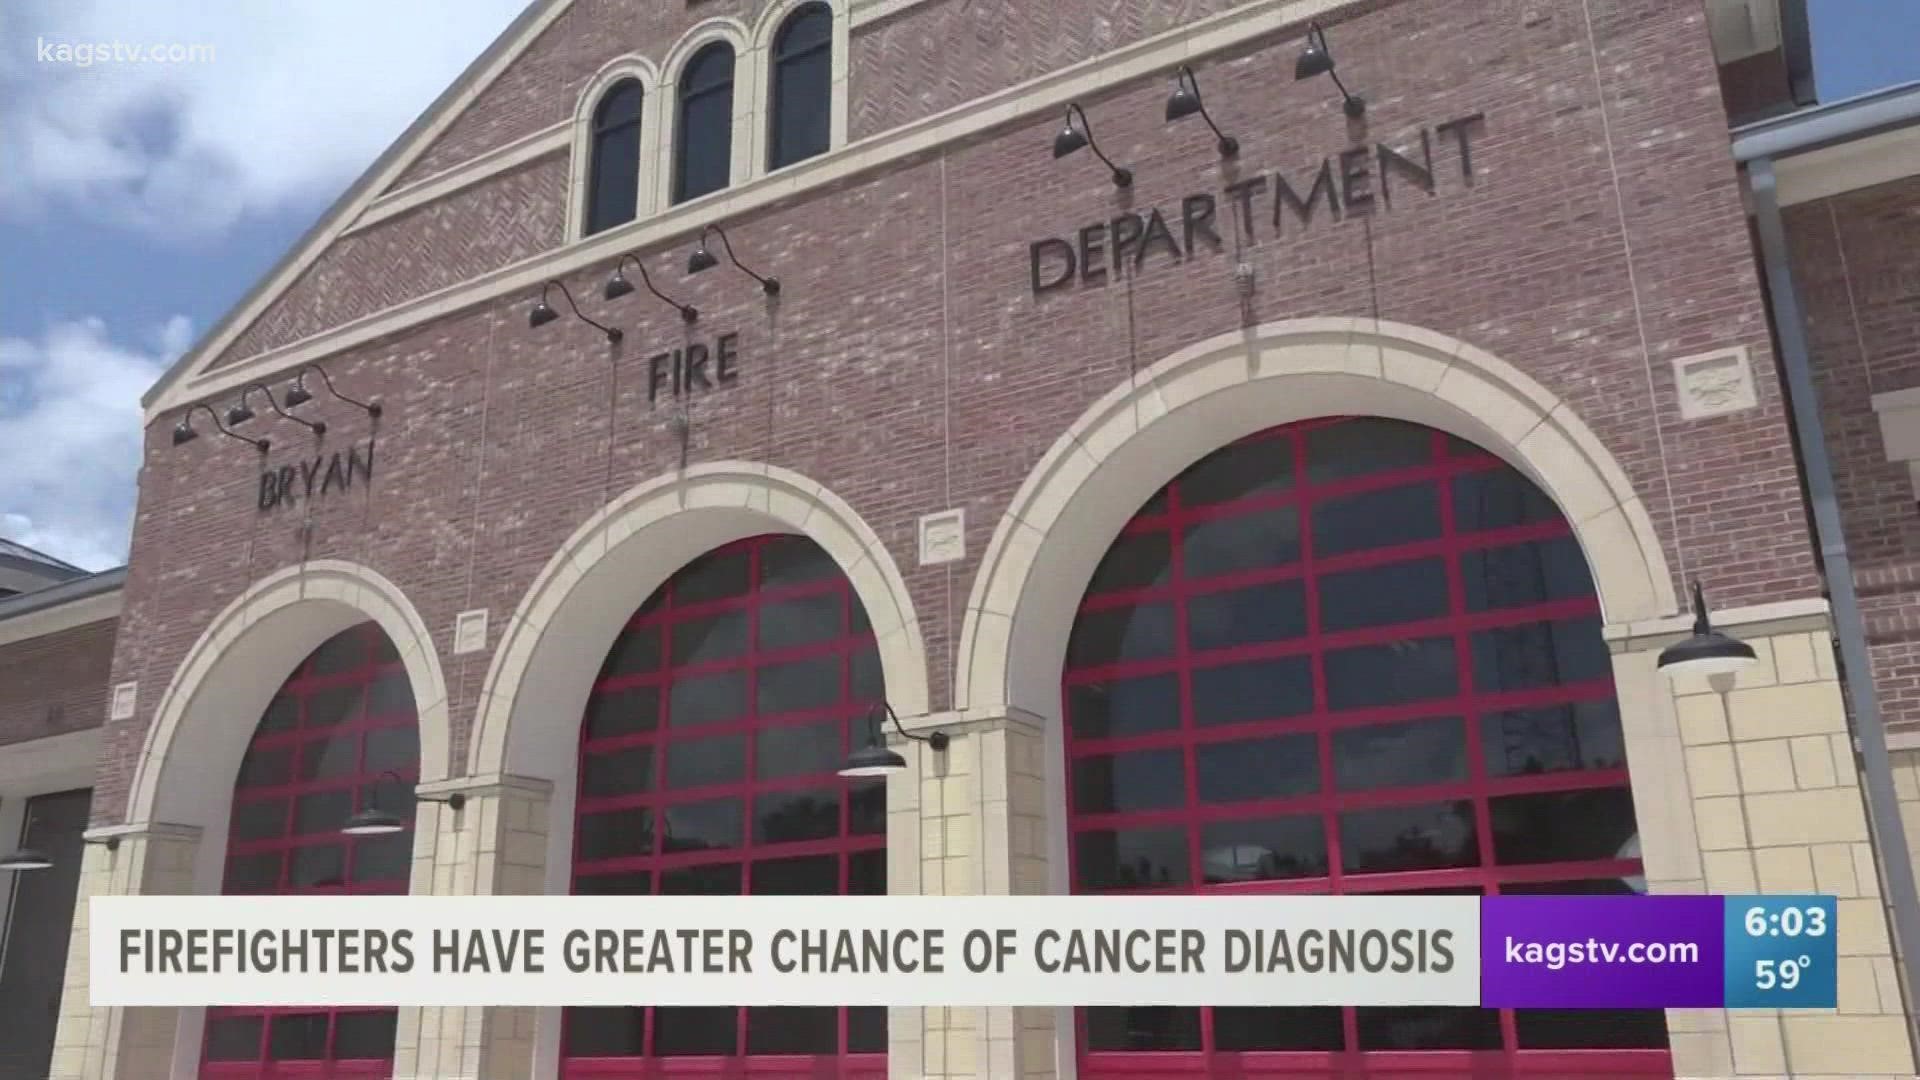 Daniel Buford, the President of the Bryan Firefighters Association, said firefighters are nine percent more likely to receive a cancer diagnosis